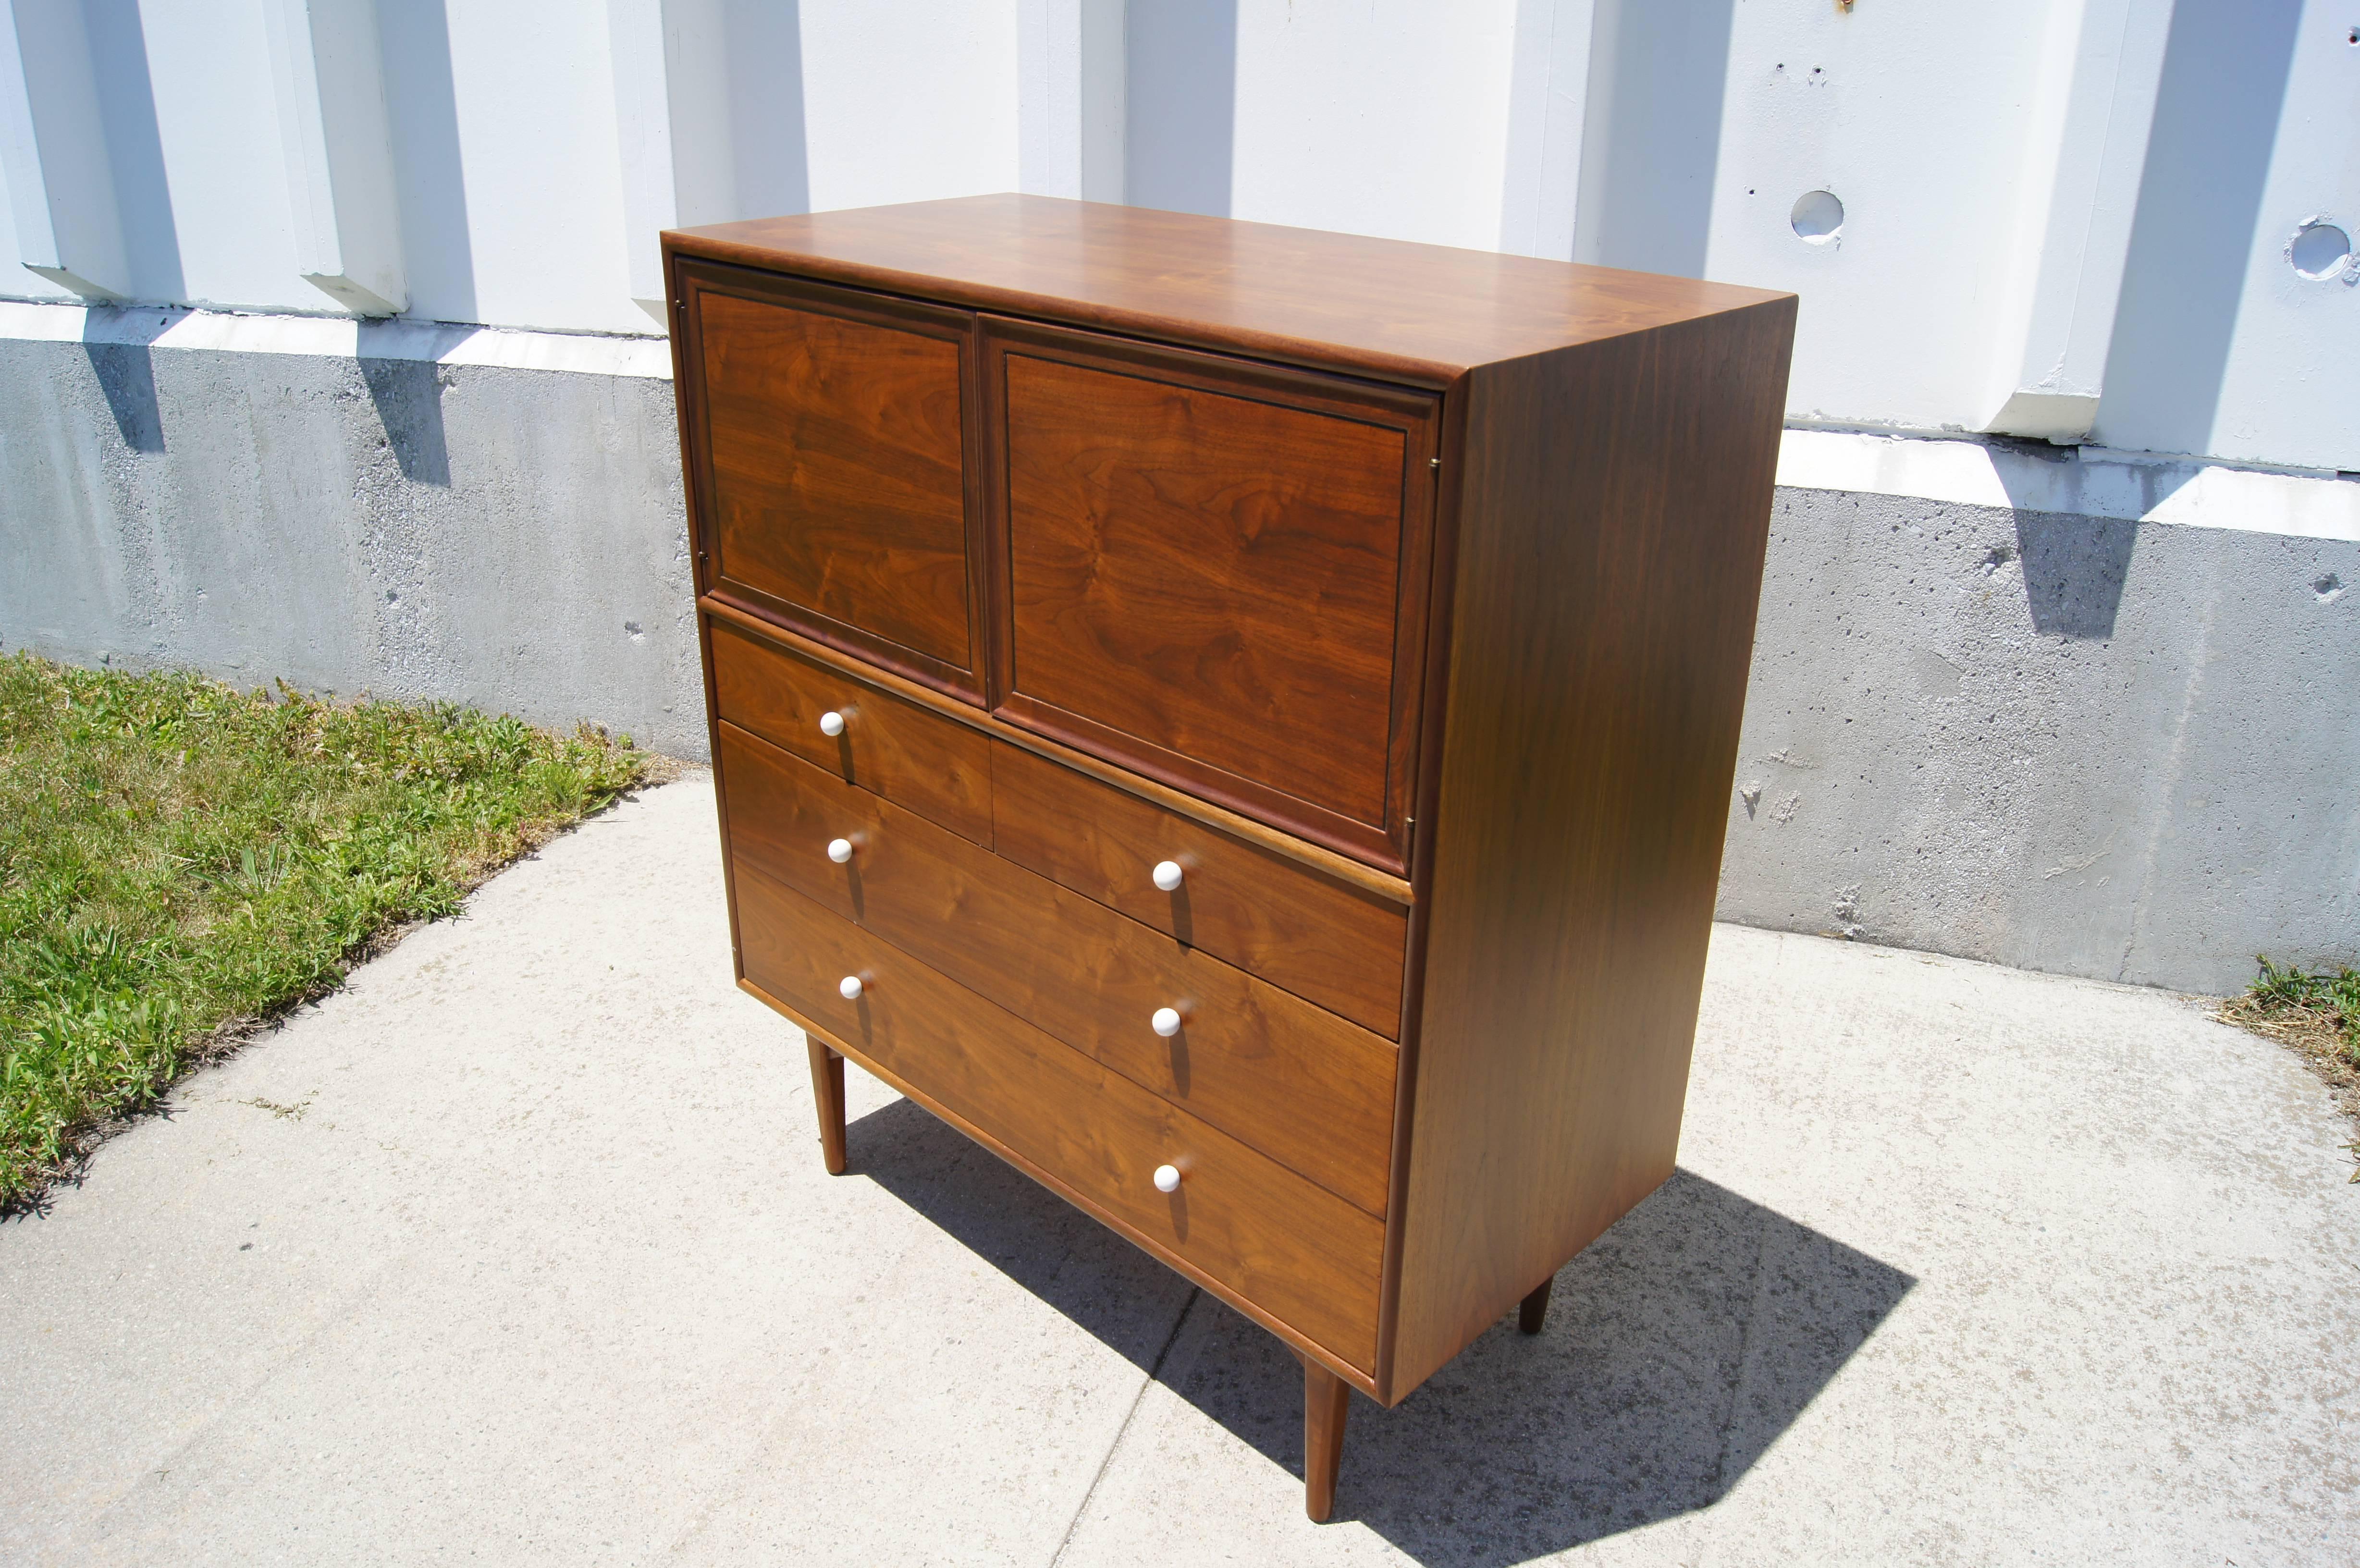 Kipp Stewart and Stewart MacDougall designed this gentlemen's dresser as part of Drexel's popular Declaration collection. Their signature white porcelain pulls highlight the beauty of the oiled walnut.

Three drawers sit atop tapered legs of solid